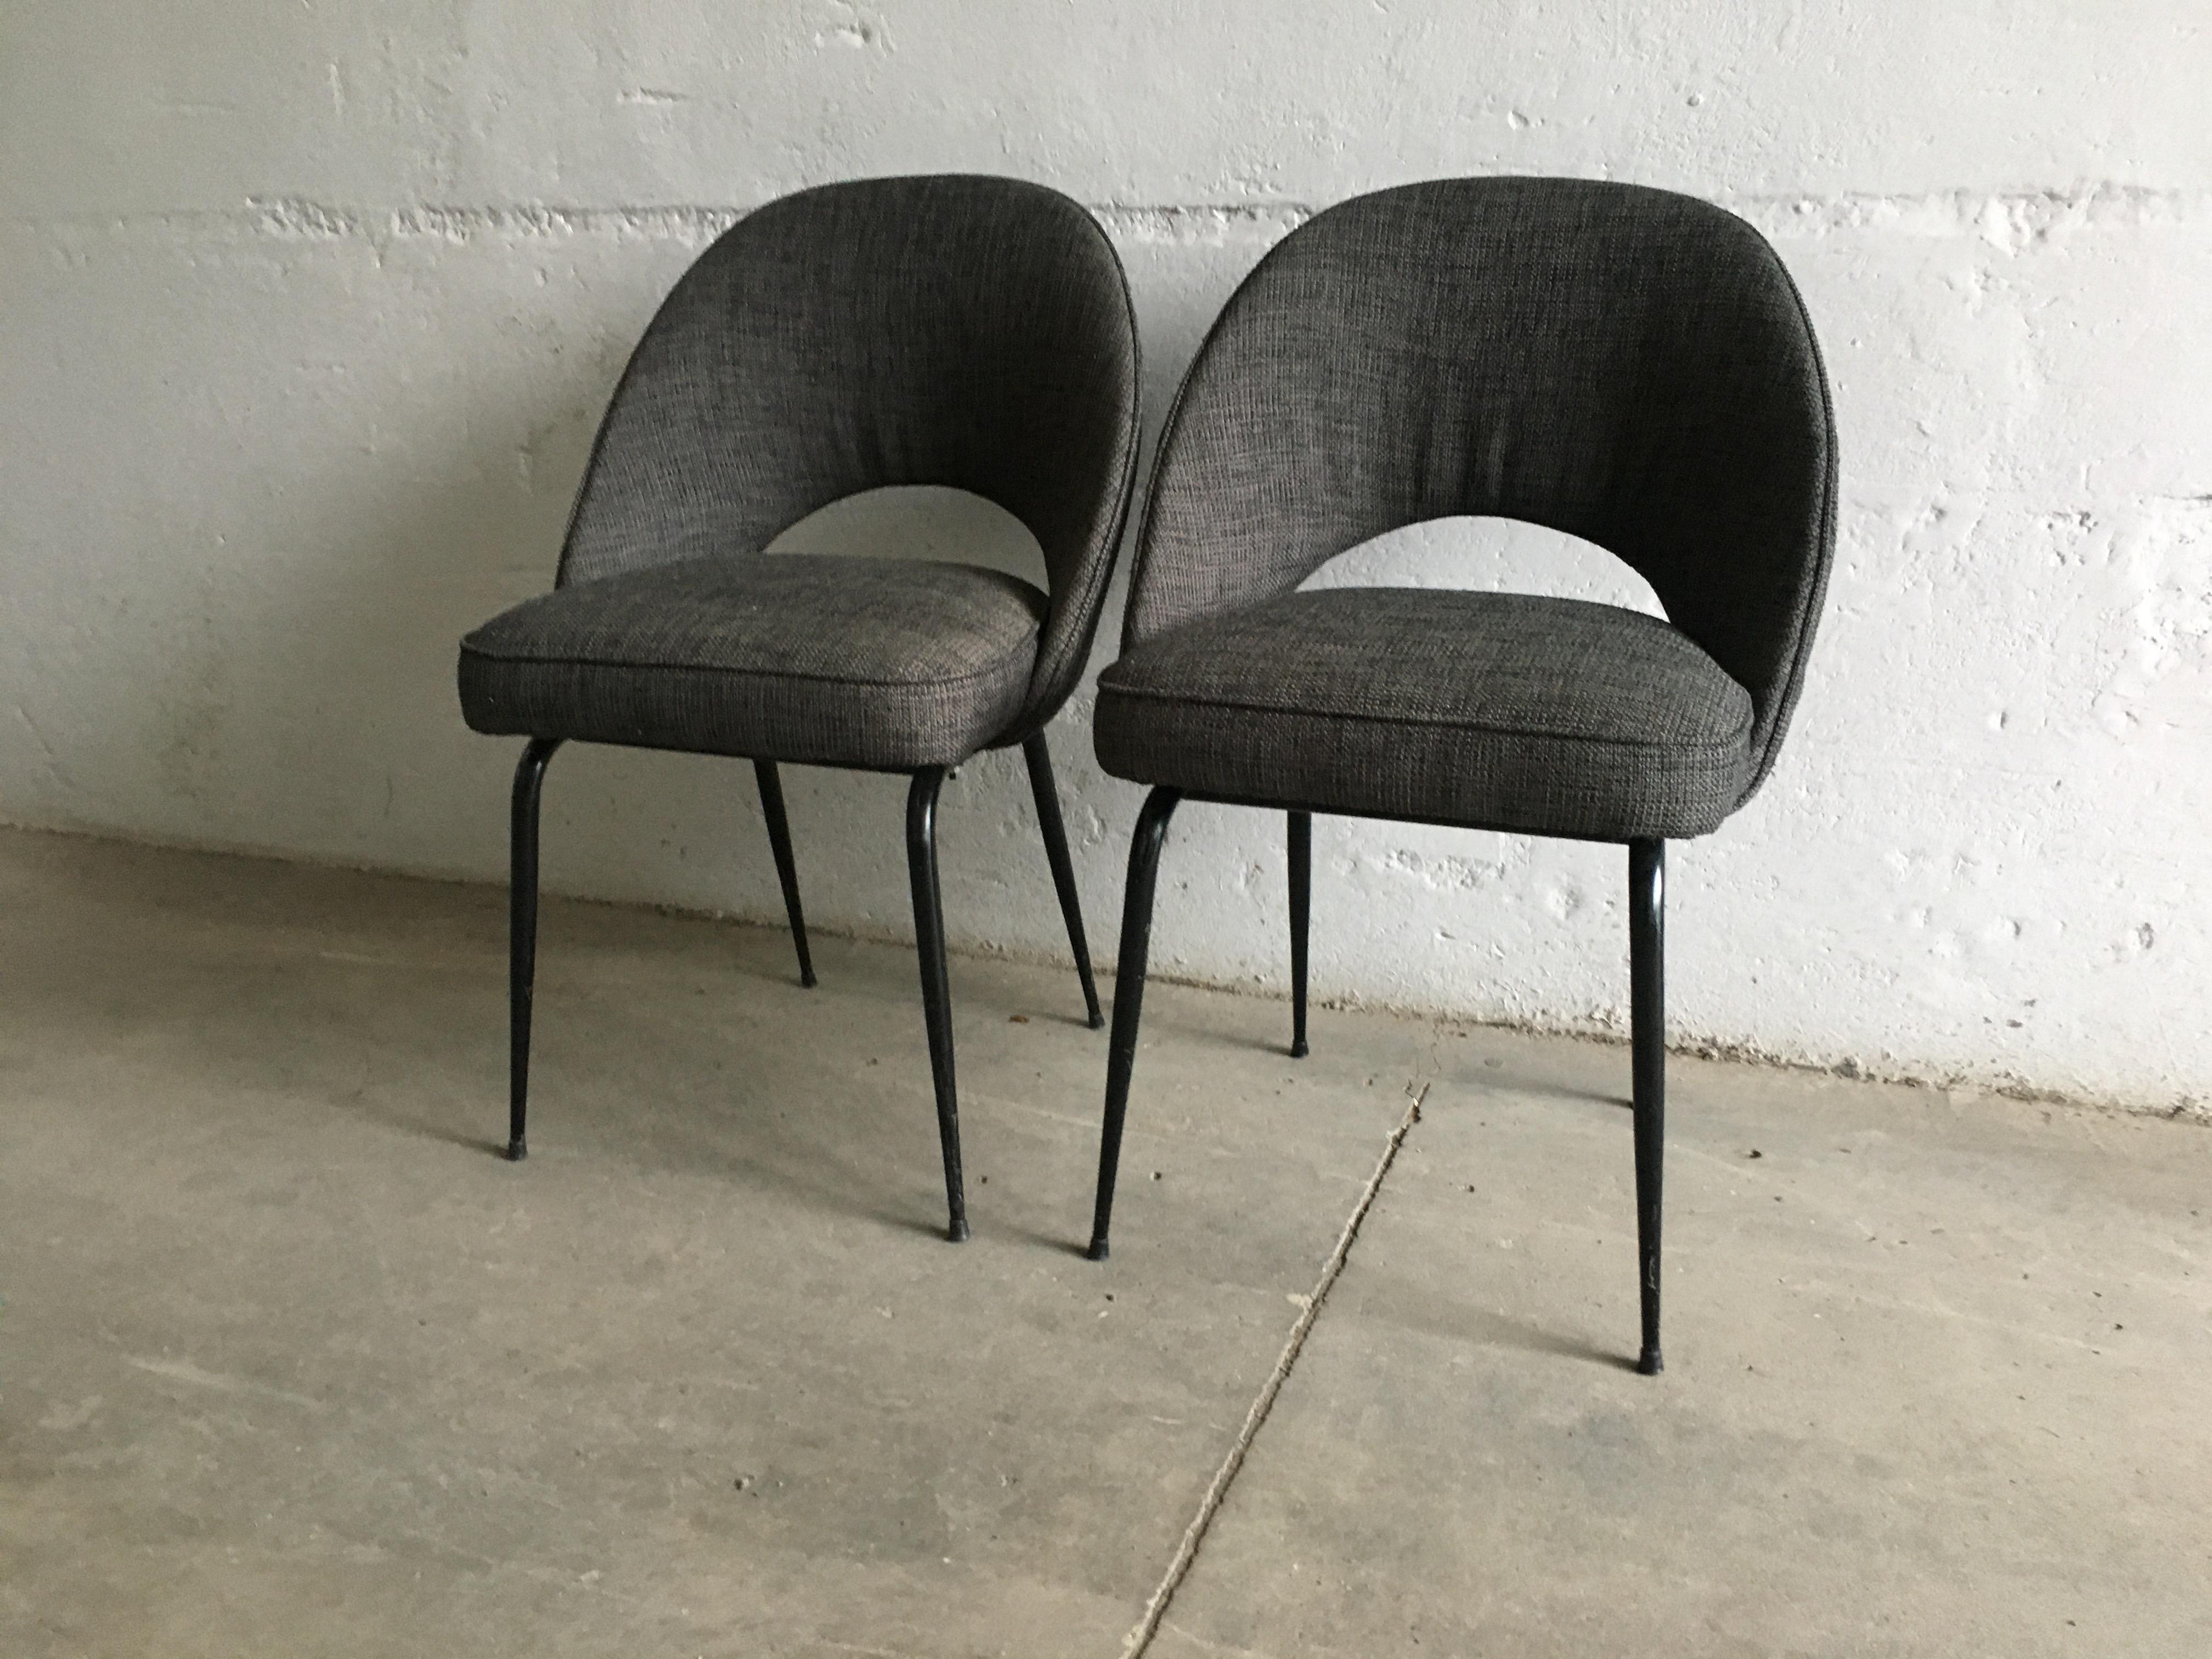 Mid-Century Modern Italian pair of upholstered chairs with black iron legs, 1960s.